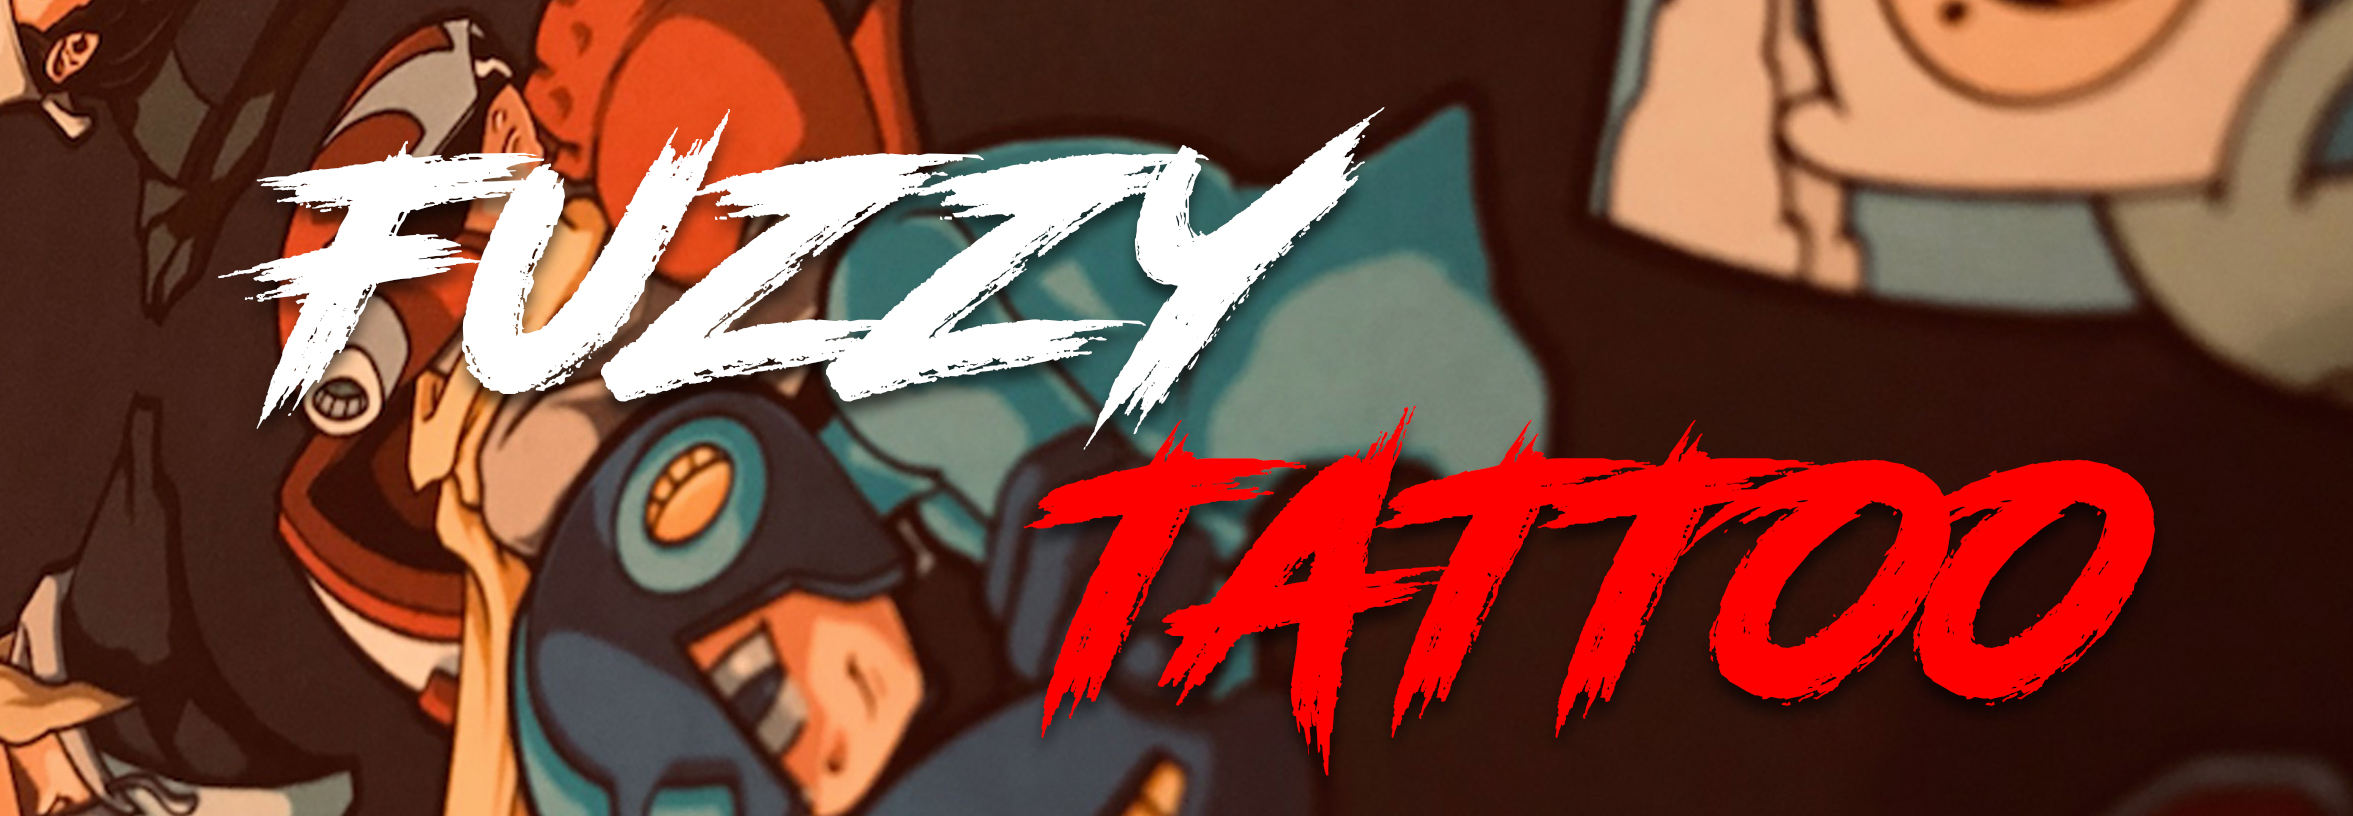 Homepage header for fuzzy tattoo